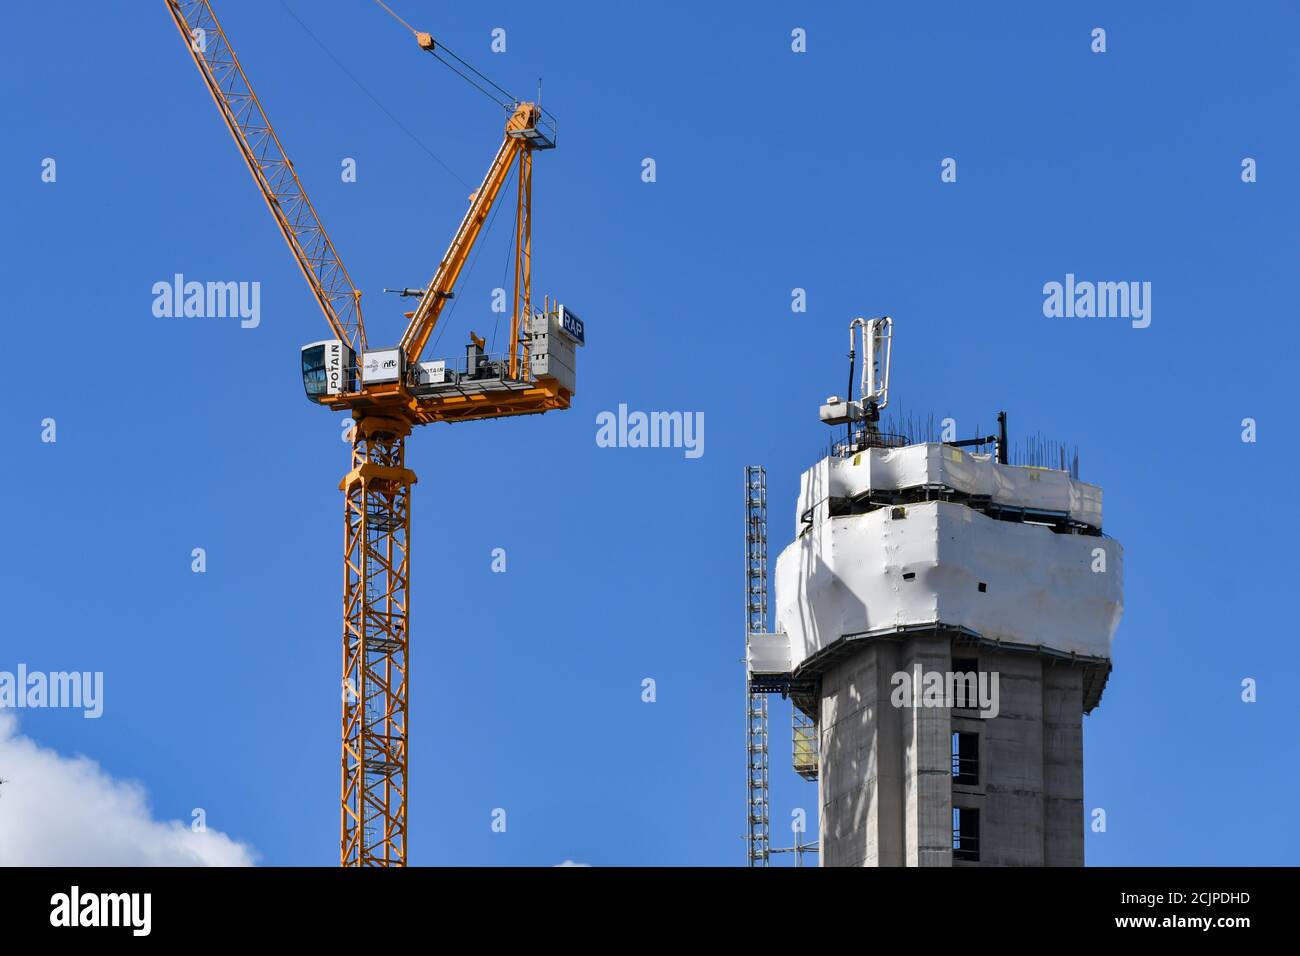 Cardiff, Wales - August 2020: Tower crane being used to build the elevator shaft of a new office development in Cardiff city centre. Stock Photo